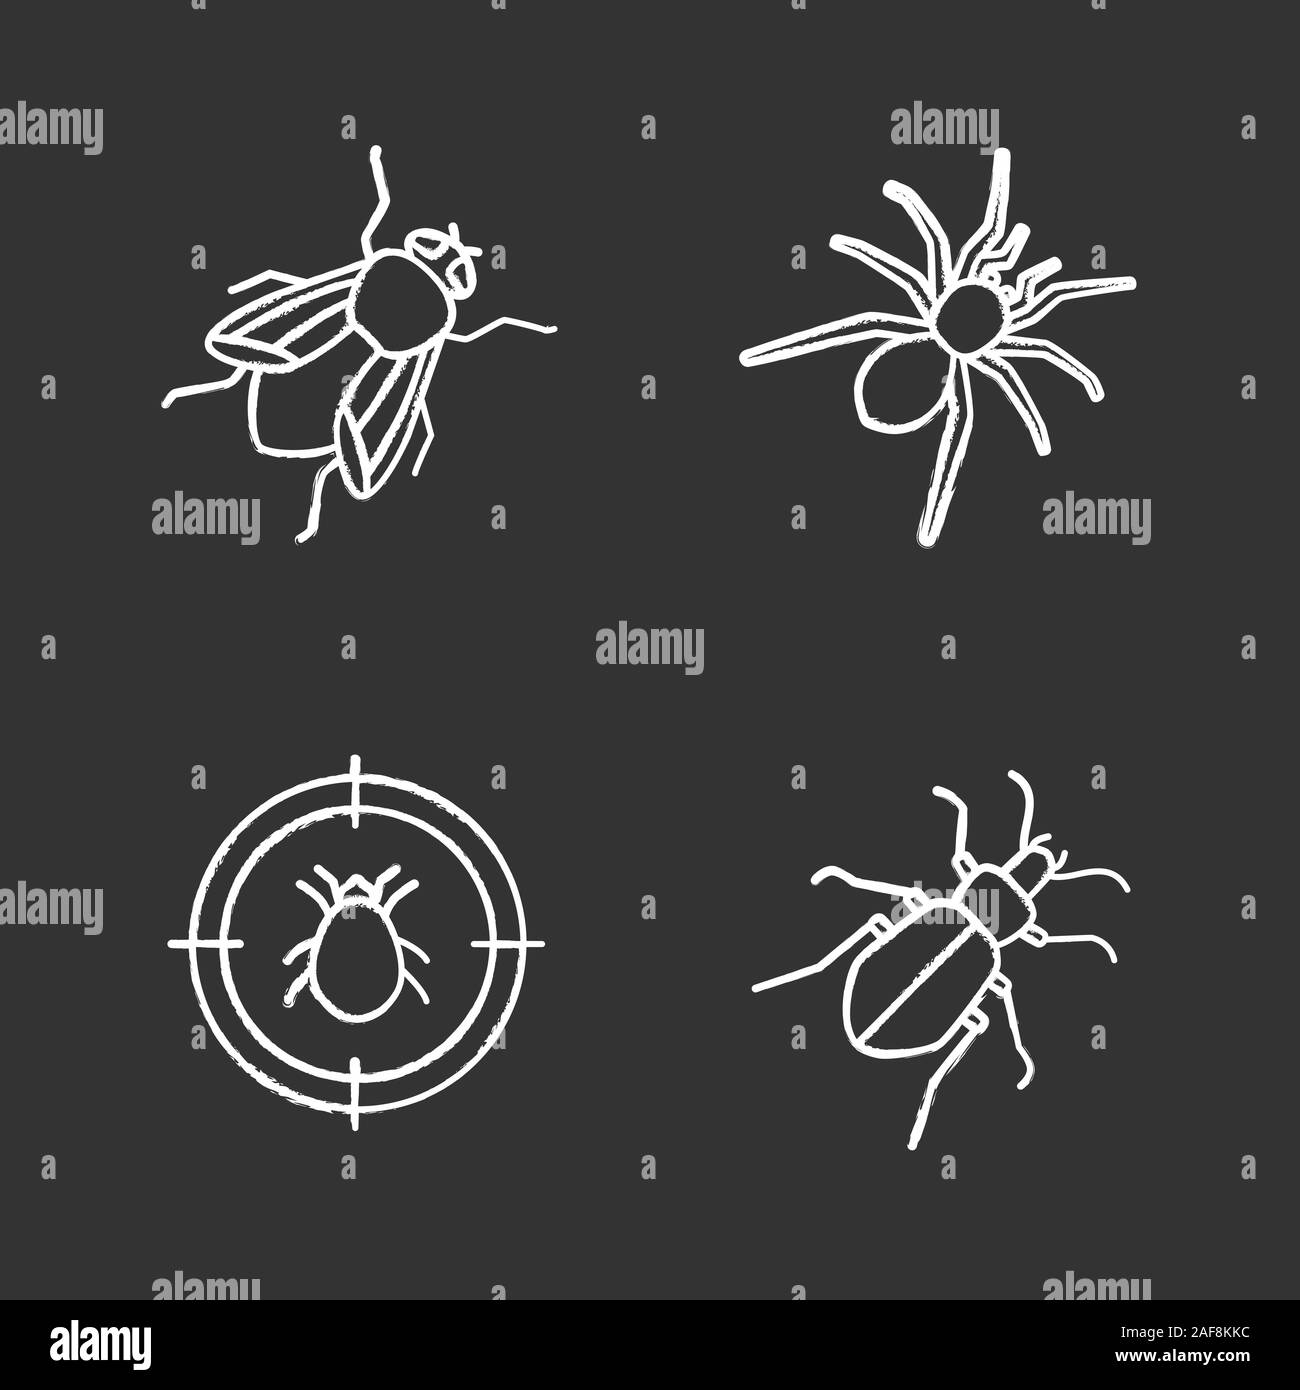 Pest control chalk icons set. Mite target, ground beetle, spider, housefly. Isolated vector chalkboard illustrations Stock Vector